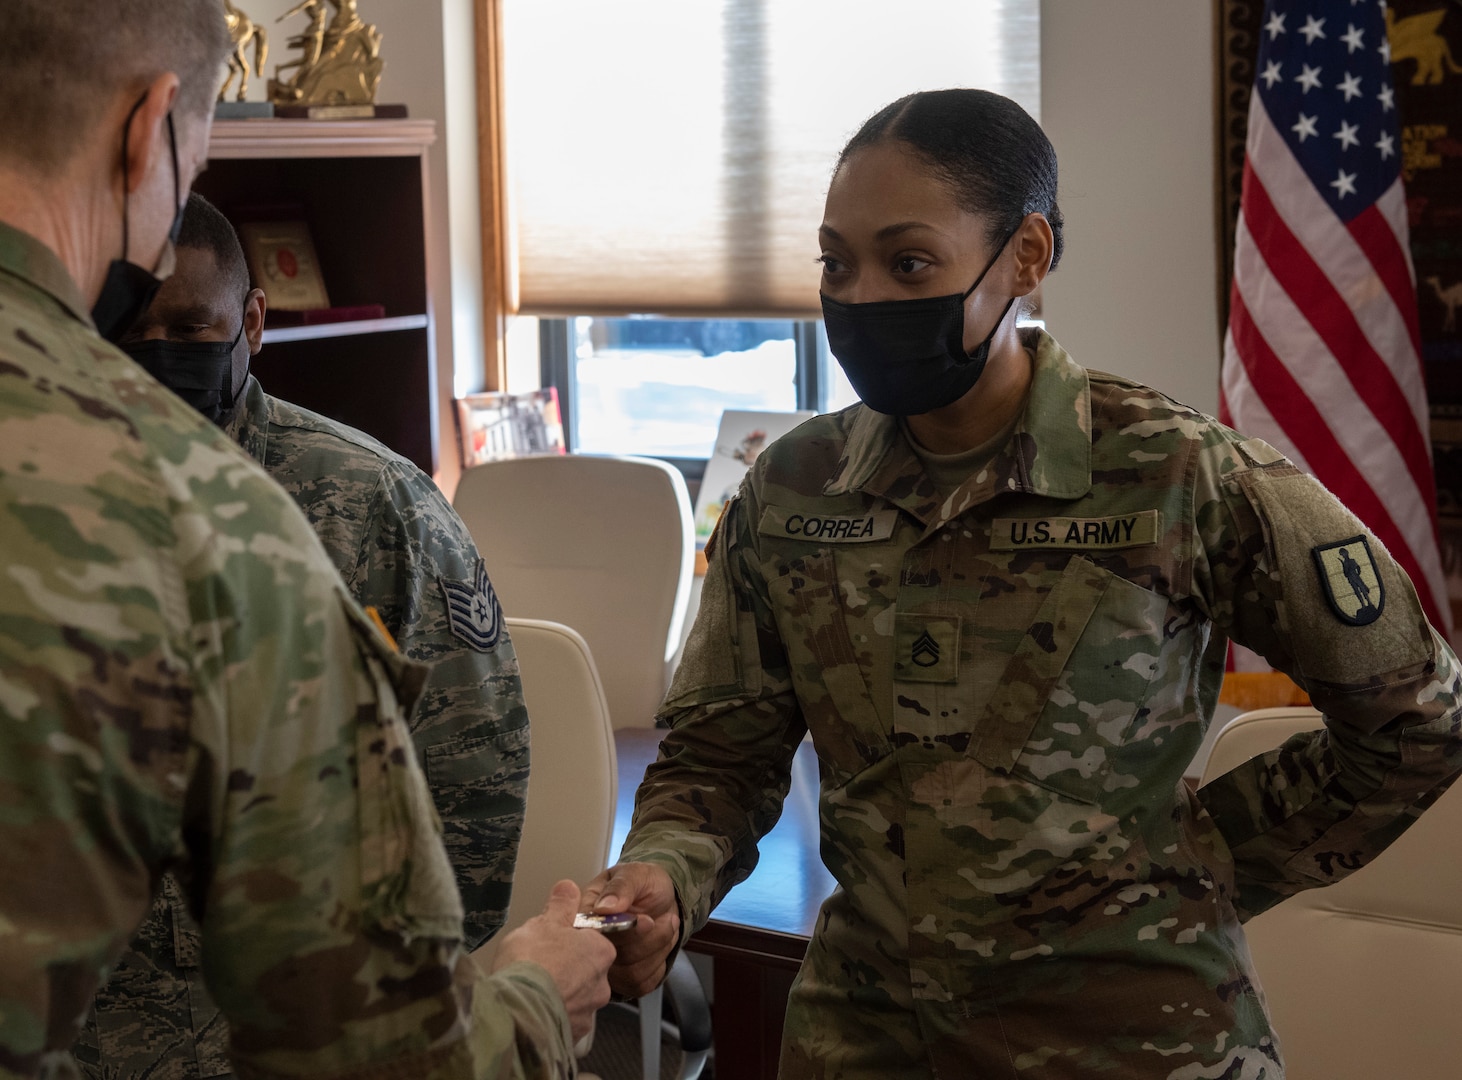 Staff Sgt. Selena Correa receives a coin from Gen. Daniel Hokanson during a visit by Hokanson to the Vermont National Guard Joint Task Force Headquarters Feb. 26, 2021. Correa and Air Force Tech. Sgt. Kirby Addison (left) were recognized for their efforts to increase the diversity recruiting and retention efforts as special emphasis program managers for the Vermont Guard. Hokanson is the chief of the National Guard Bureau. (U.S. Army National Guard photo by Don Branum)